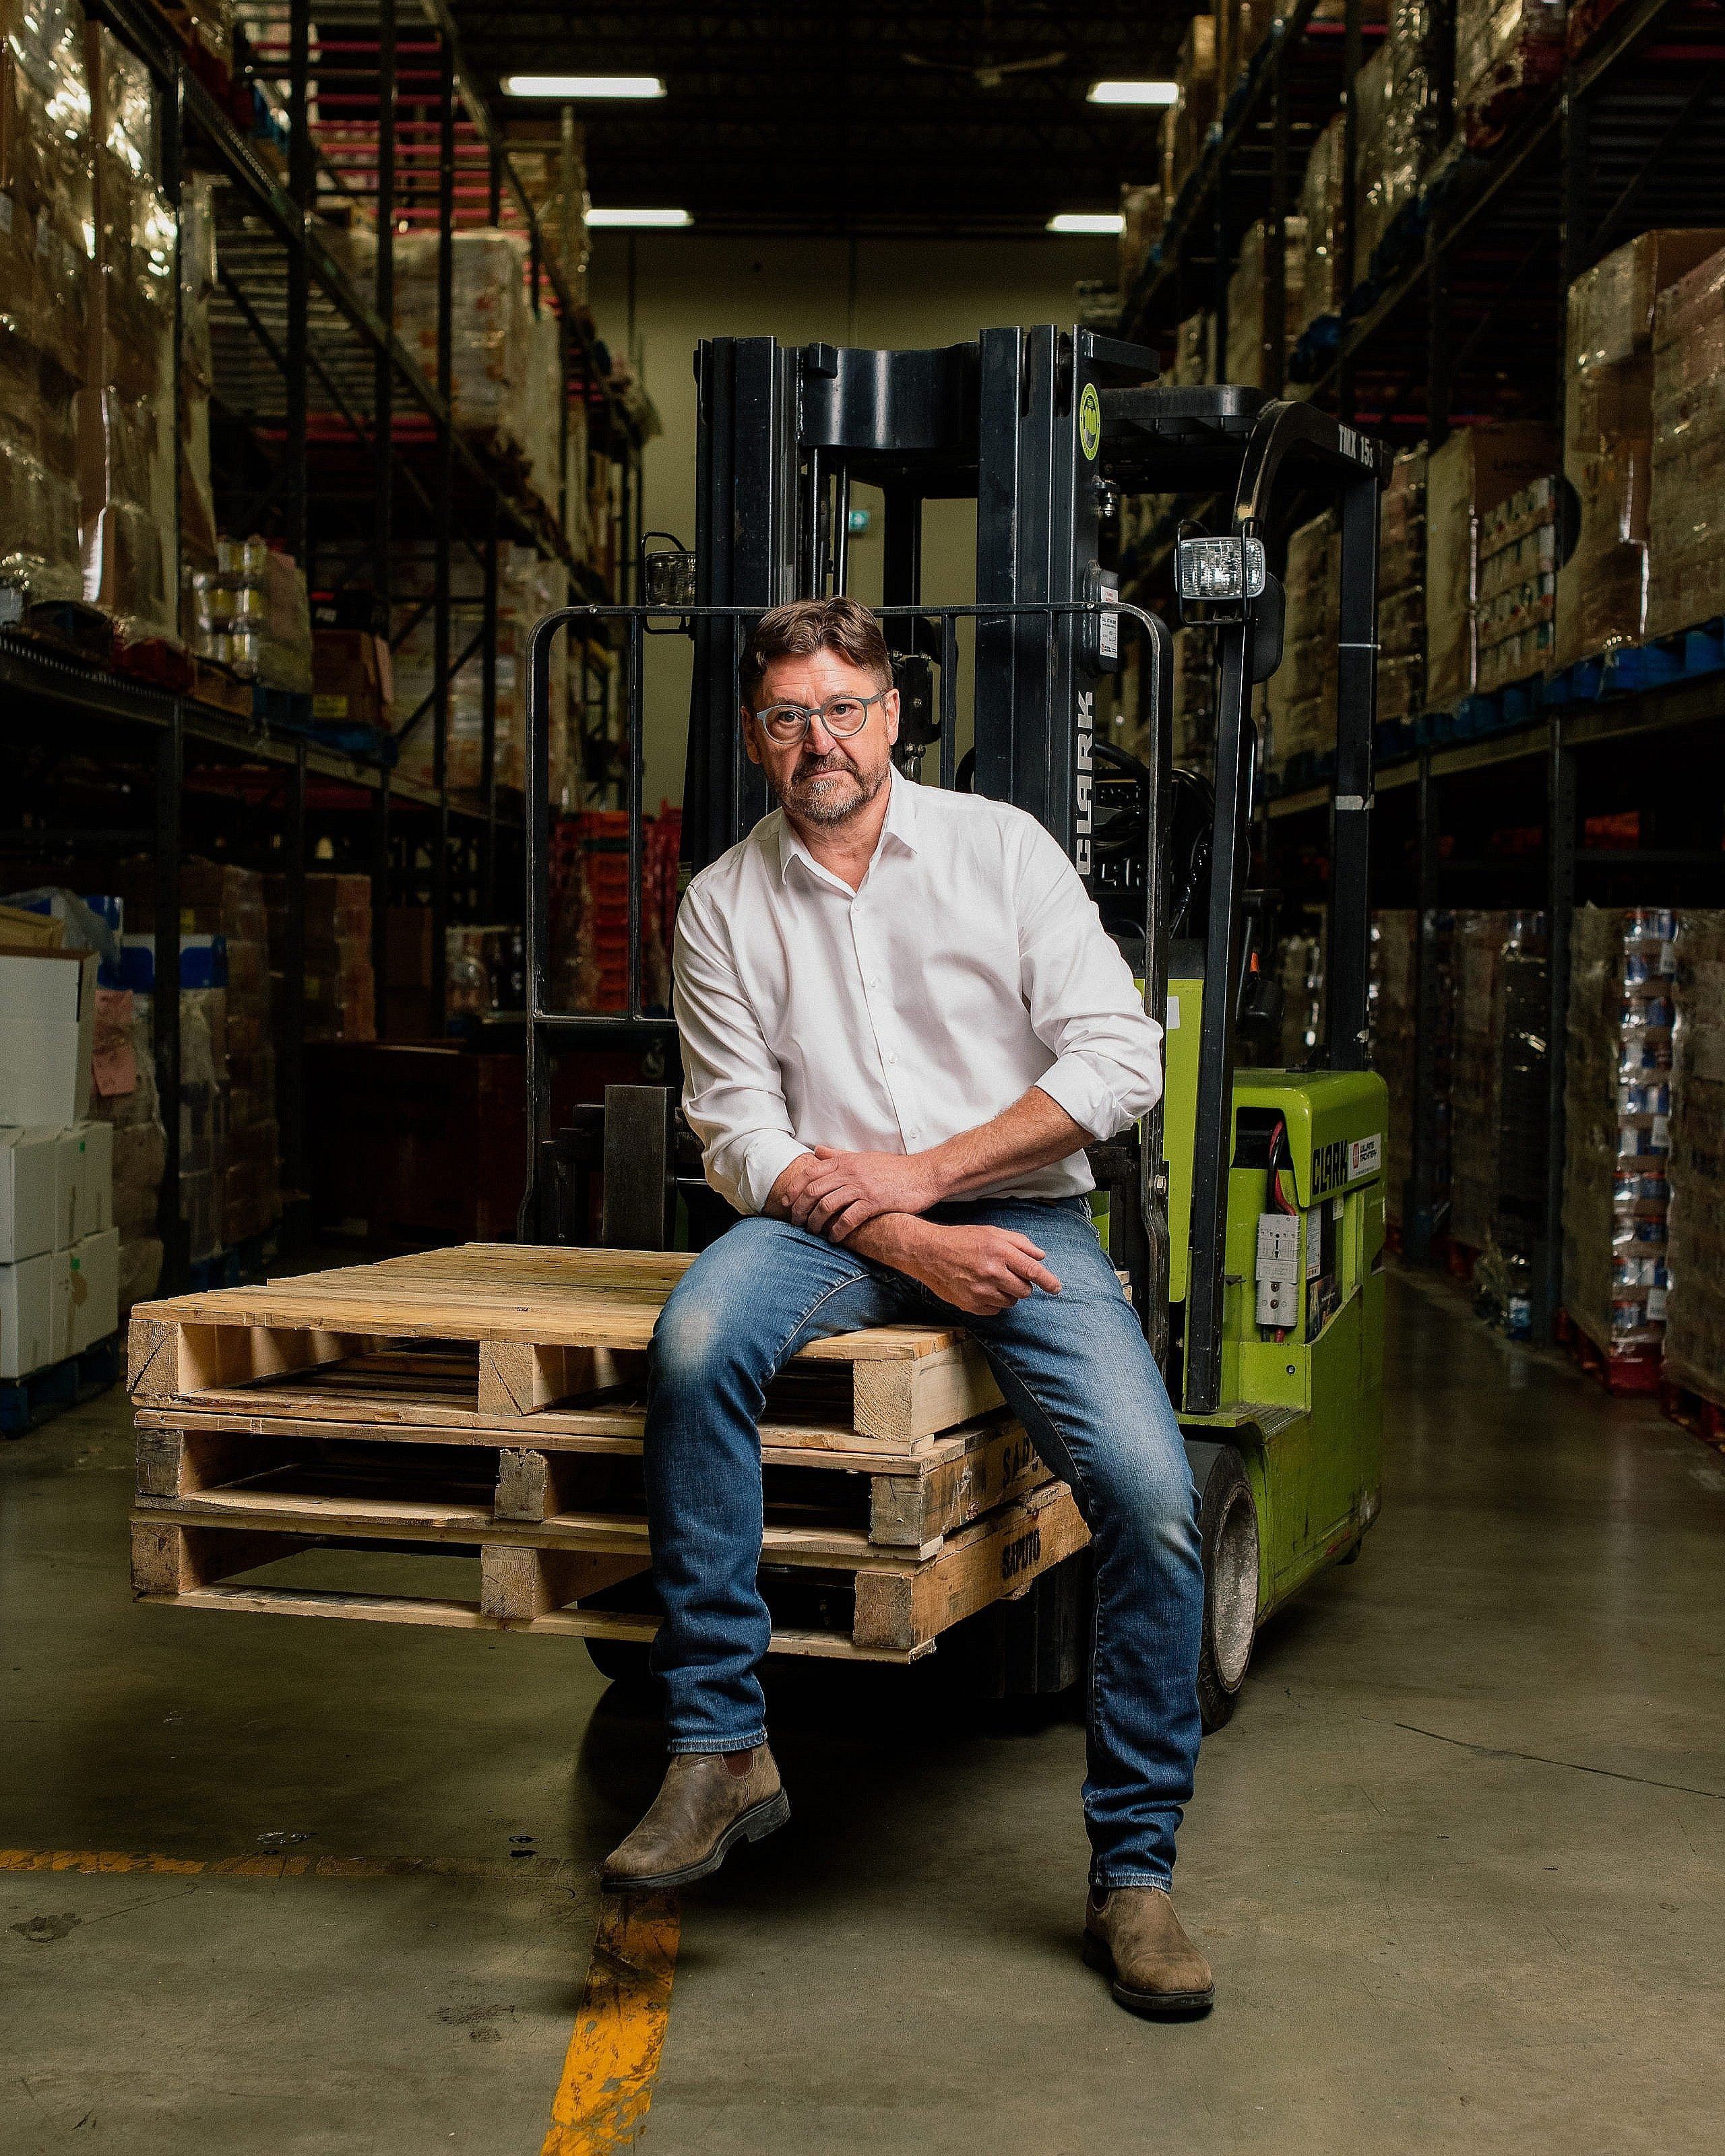 A man in a white button down shirt sits in a warehouse looking at the camera.